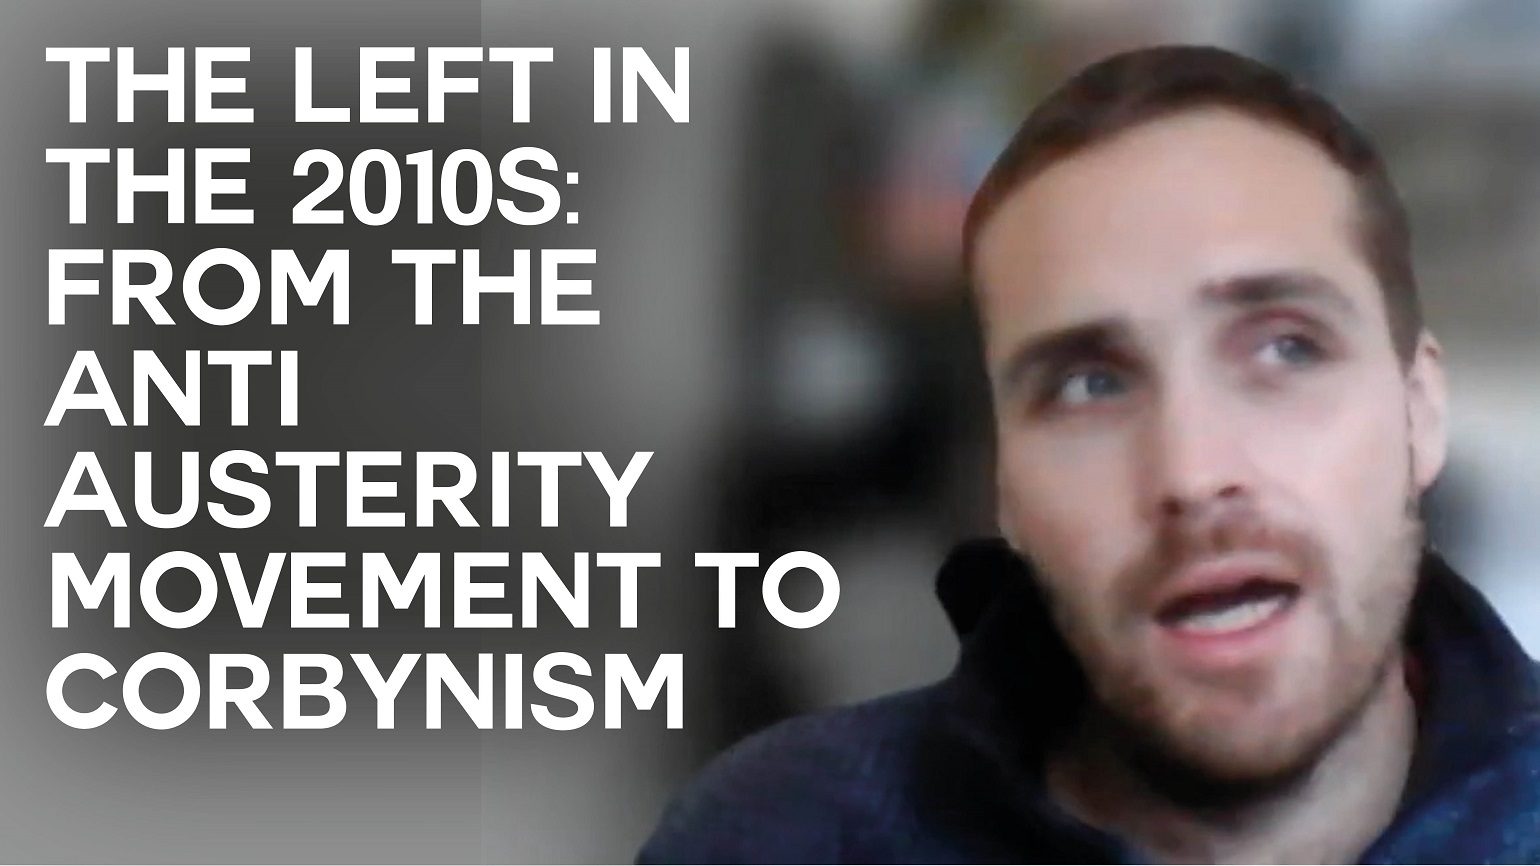 A still of an interview with Michael Chessum with text overlaid reading 'The Left in the 2010s: From the Anti-Austerity movement to Corbynism